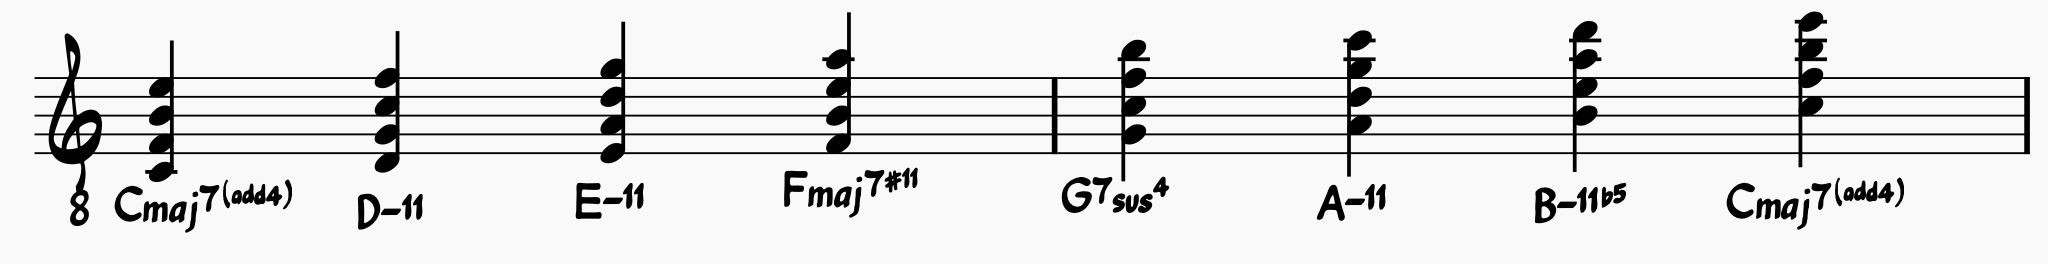 Music Scales: C major harmonized in fourths